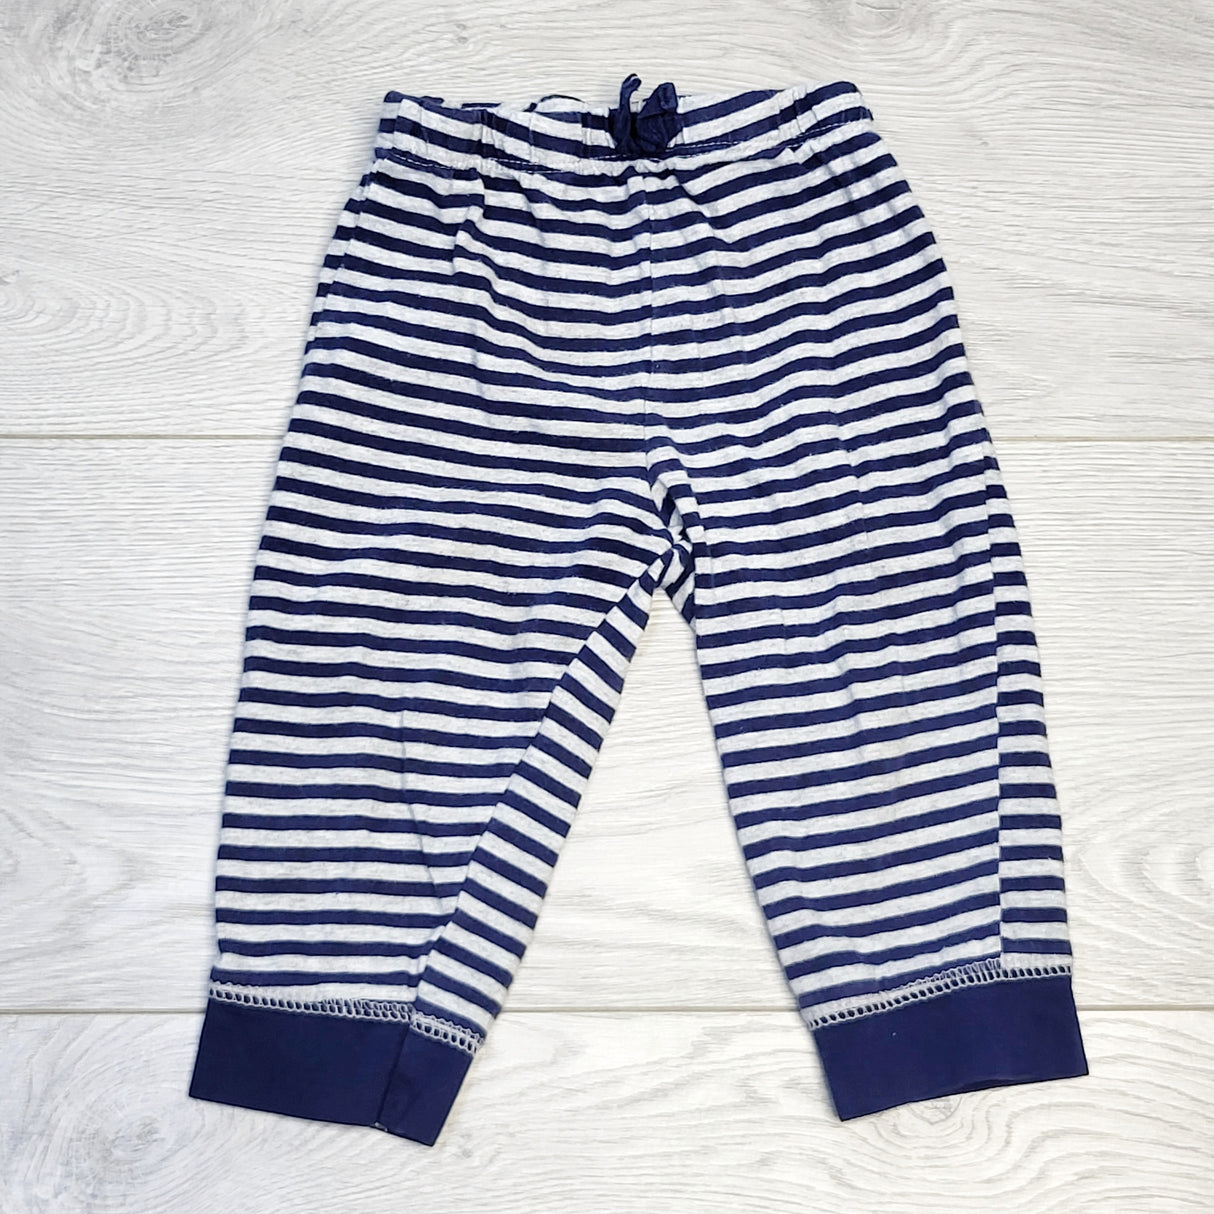 CHOL1 - Navy and grey striped cotton pants, 9 months